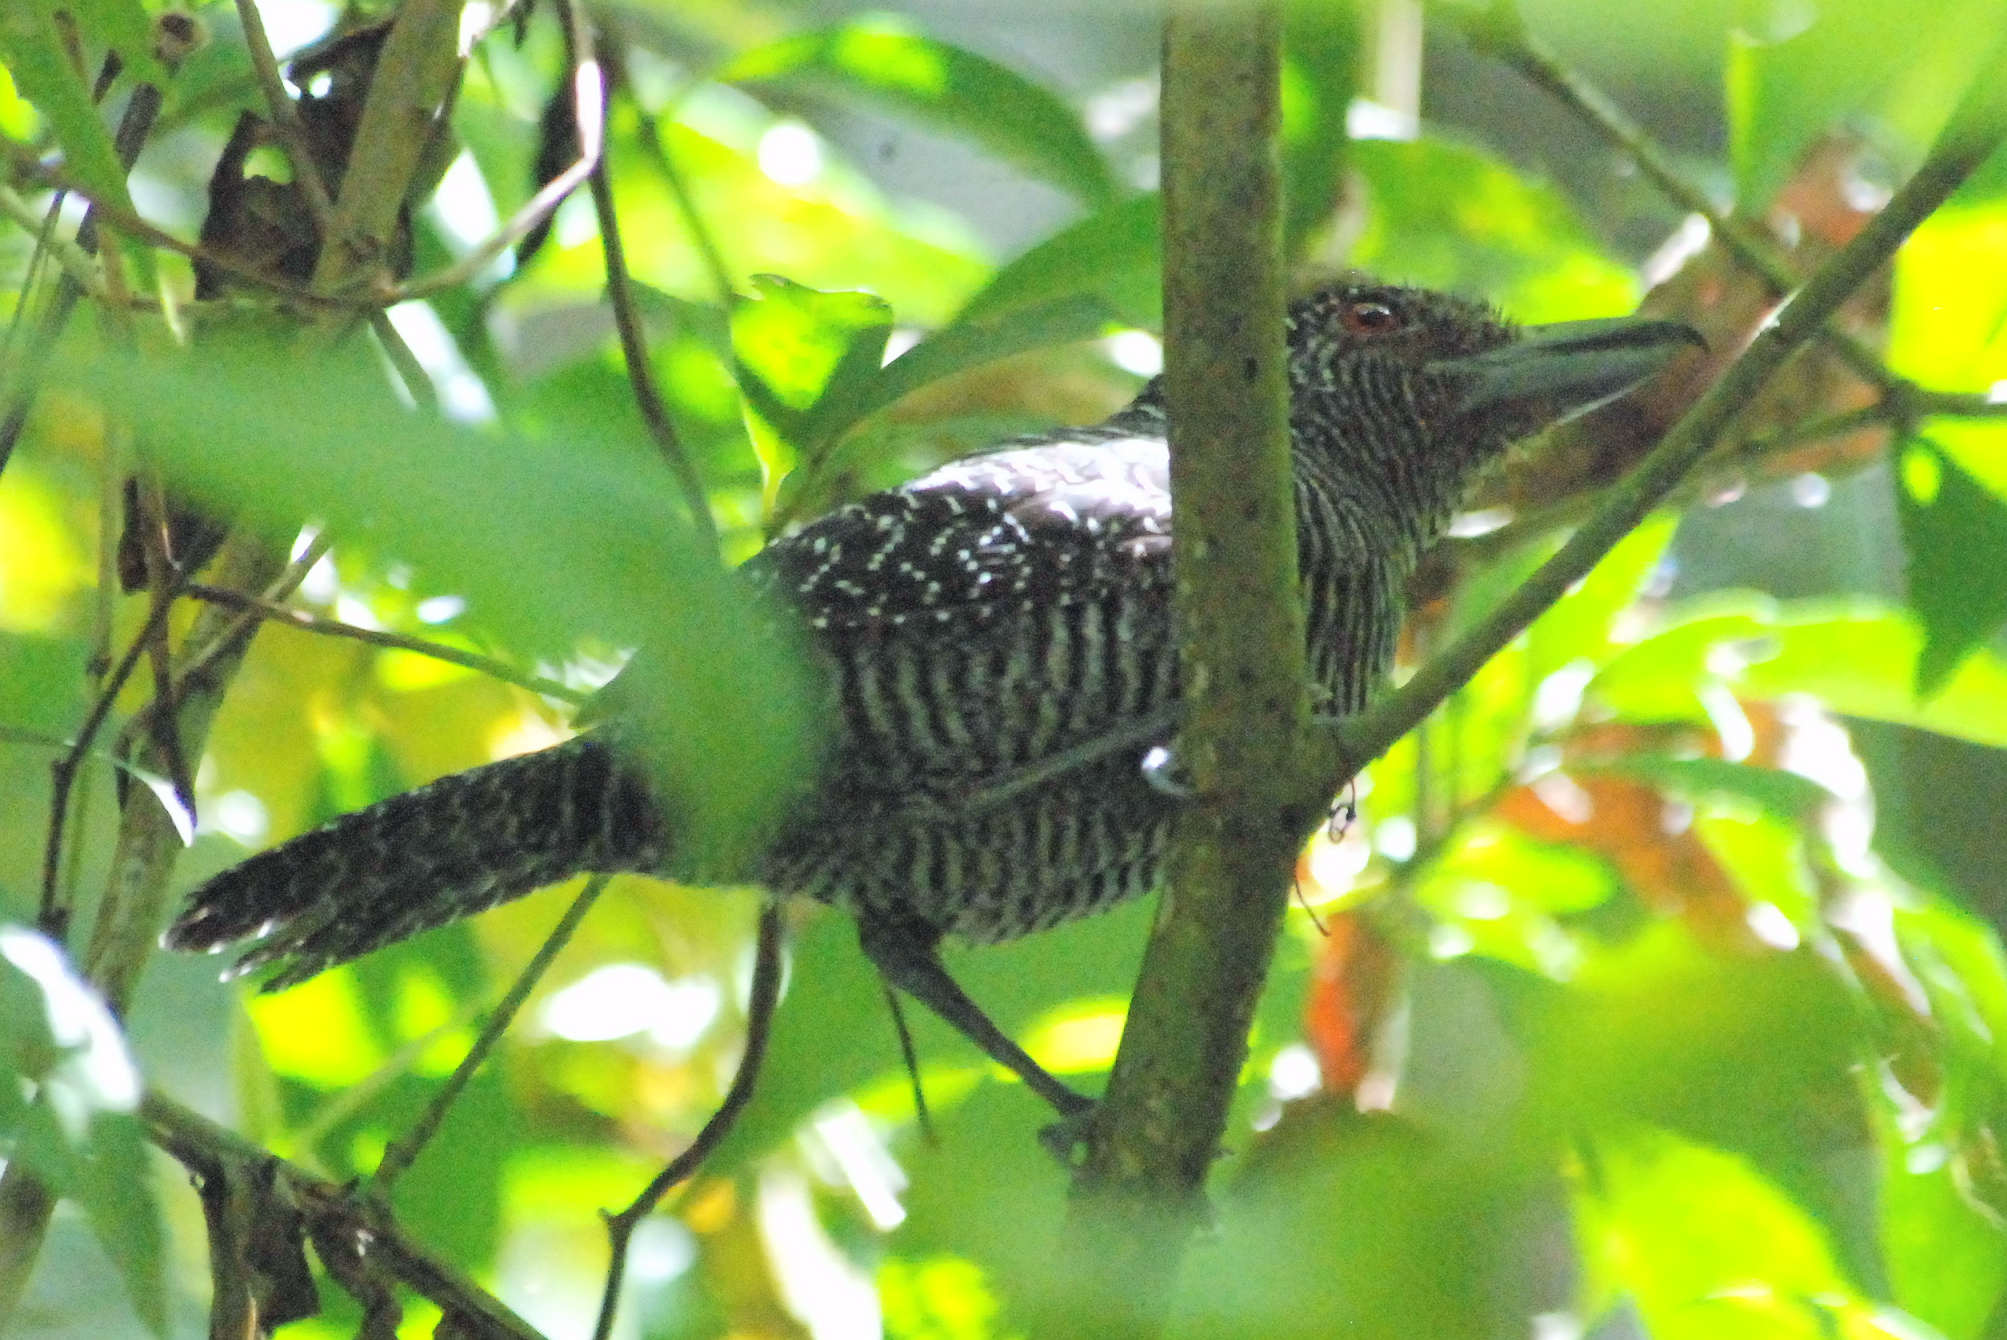 Click picture to see more Fasciated Antshrikes.